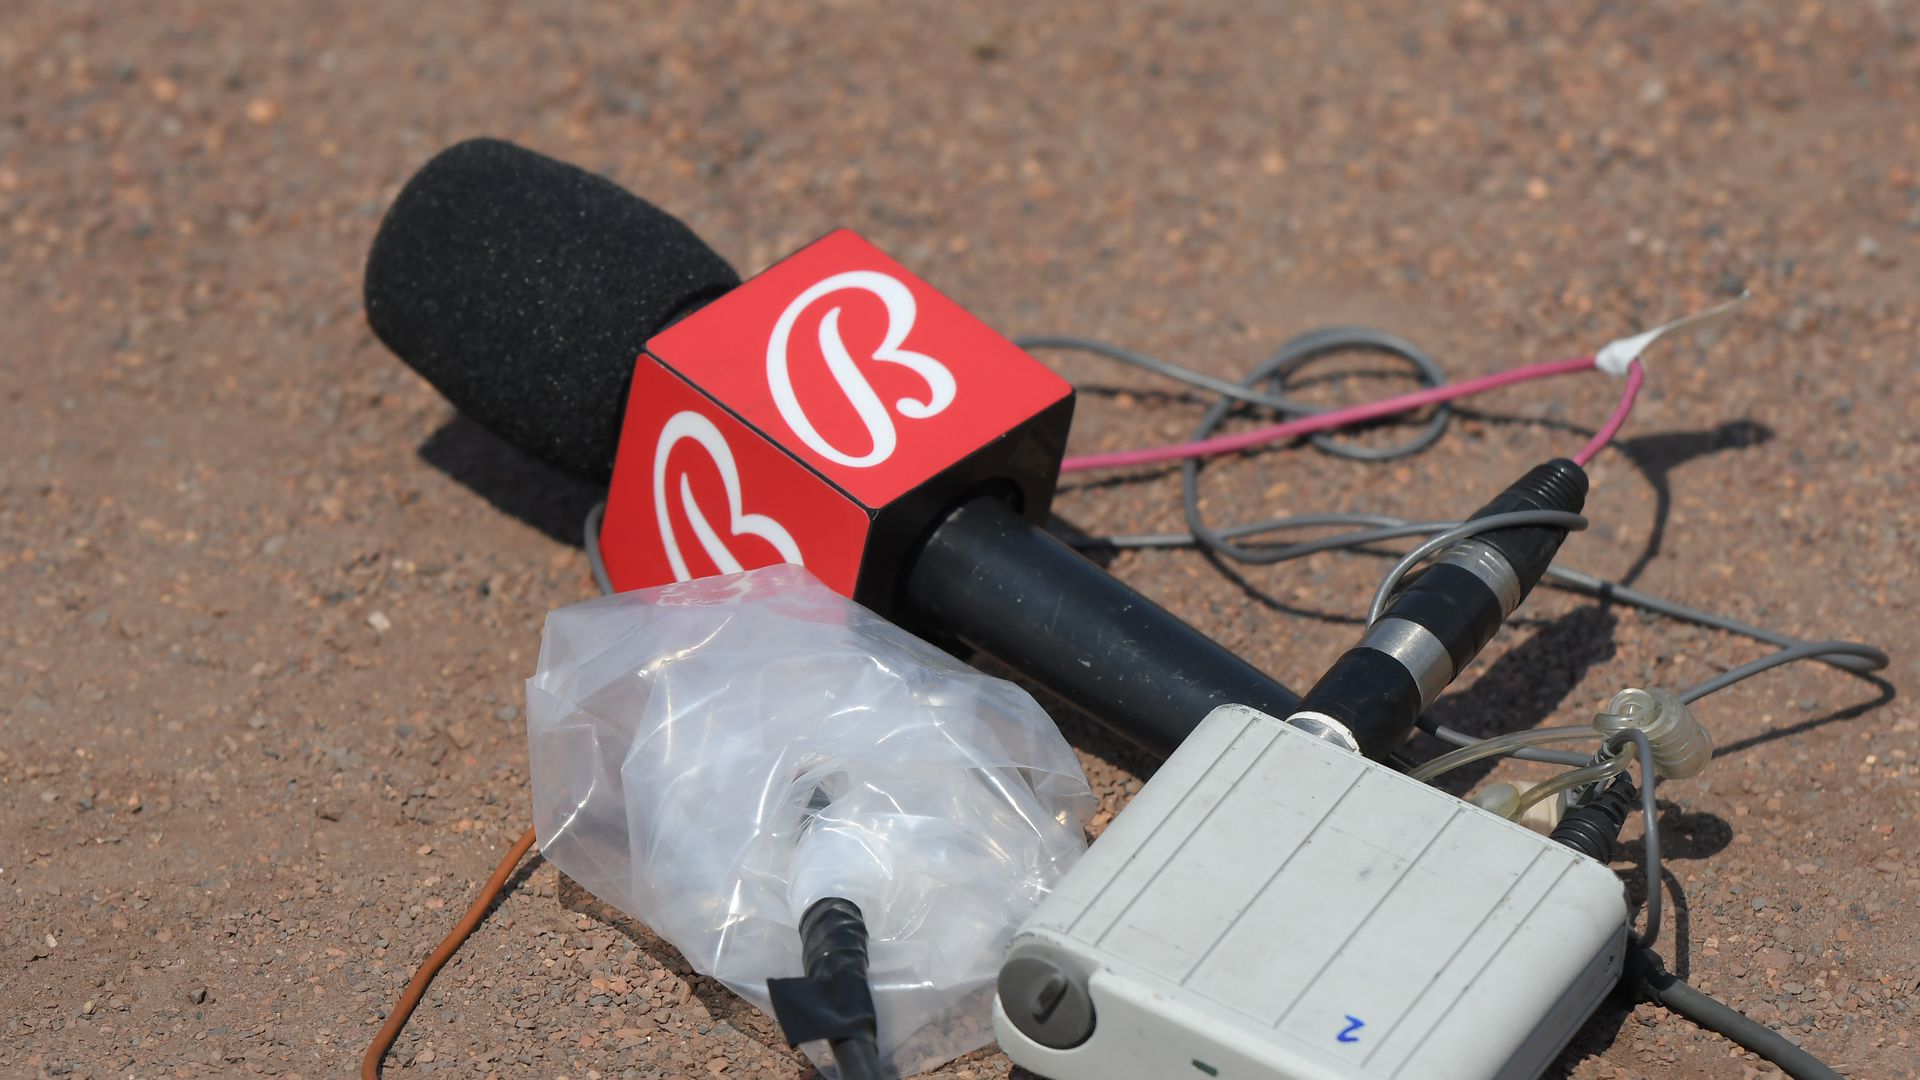 A detailed view of a Bally Sports microphone laying on the field after being used for an interview prior to the Spring Training game between the Detroit Tigers and the Washington Nationals at Publix Field at Joker Marchant Stadium on March 8, 2023 in Lakeland, Florida. The Tigers defeated the Nationals 2-1.